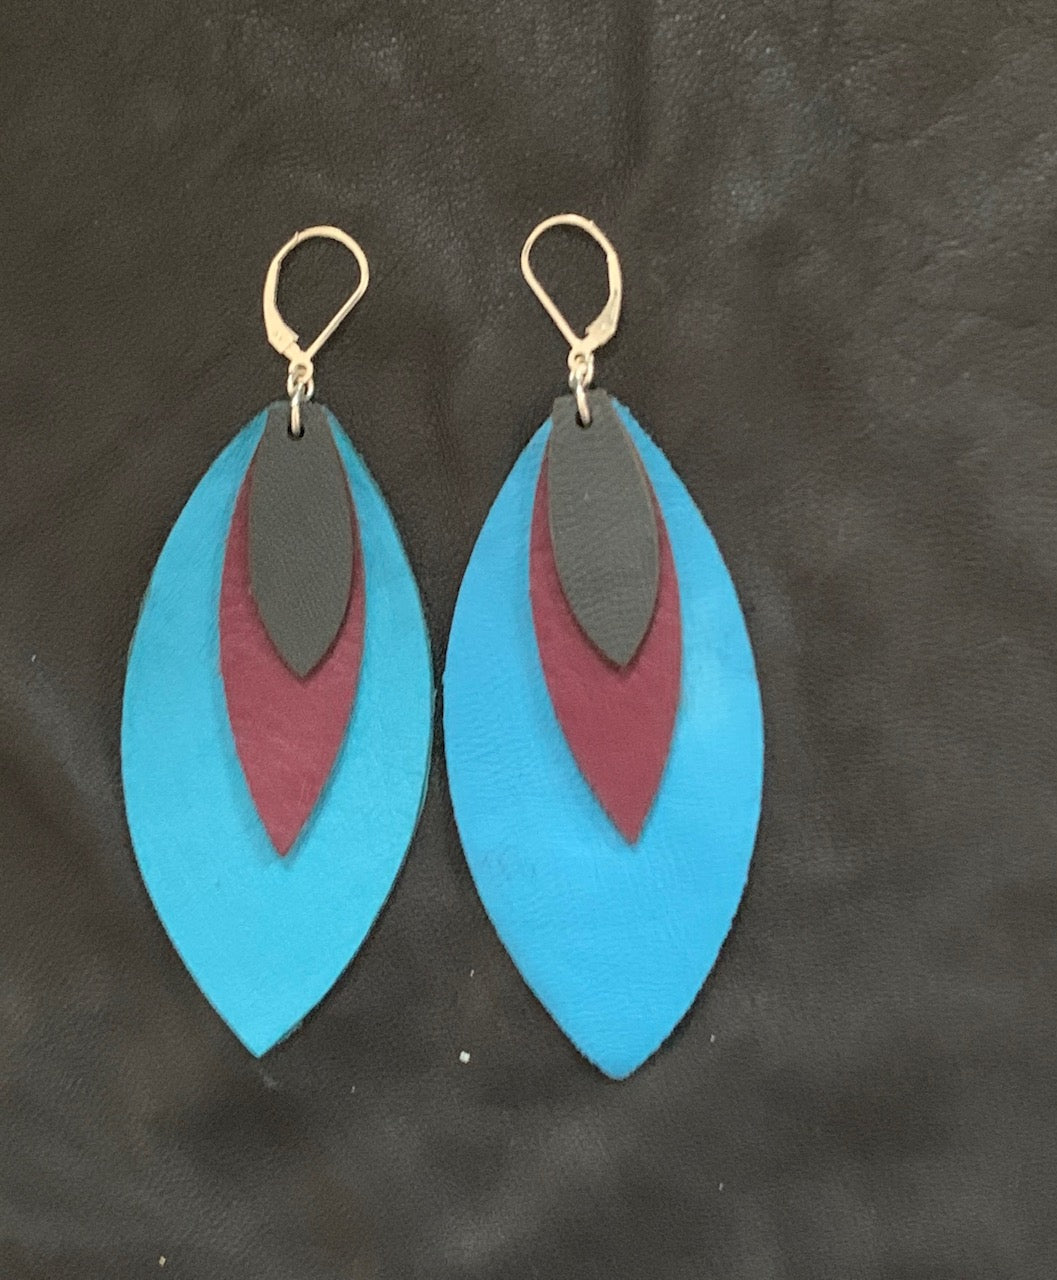 Leather Feather Earrings in Brown, Turquoise, and Burgundy